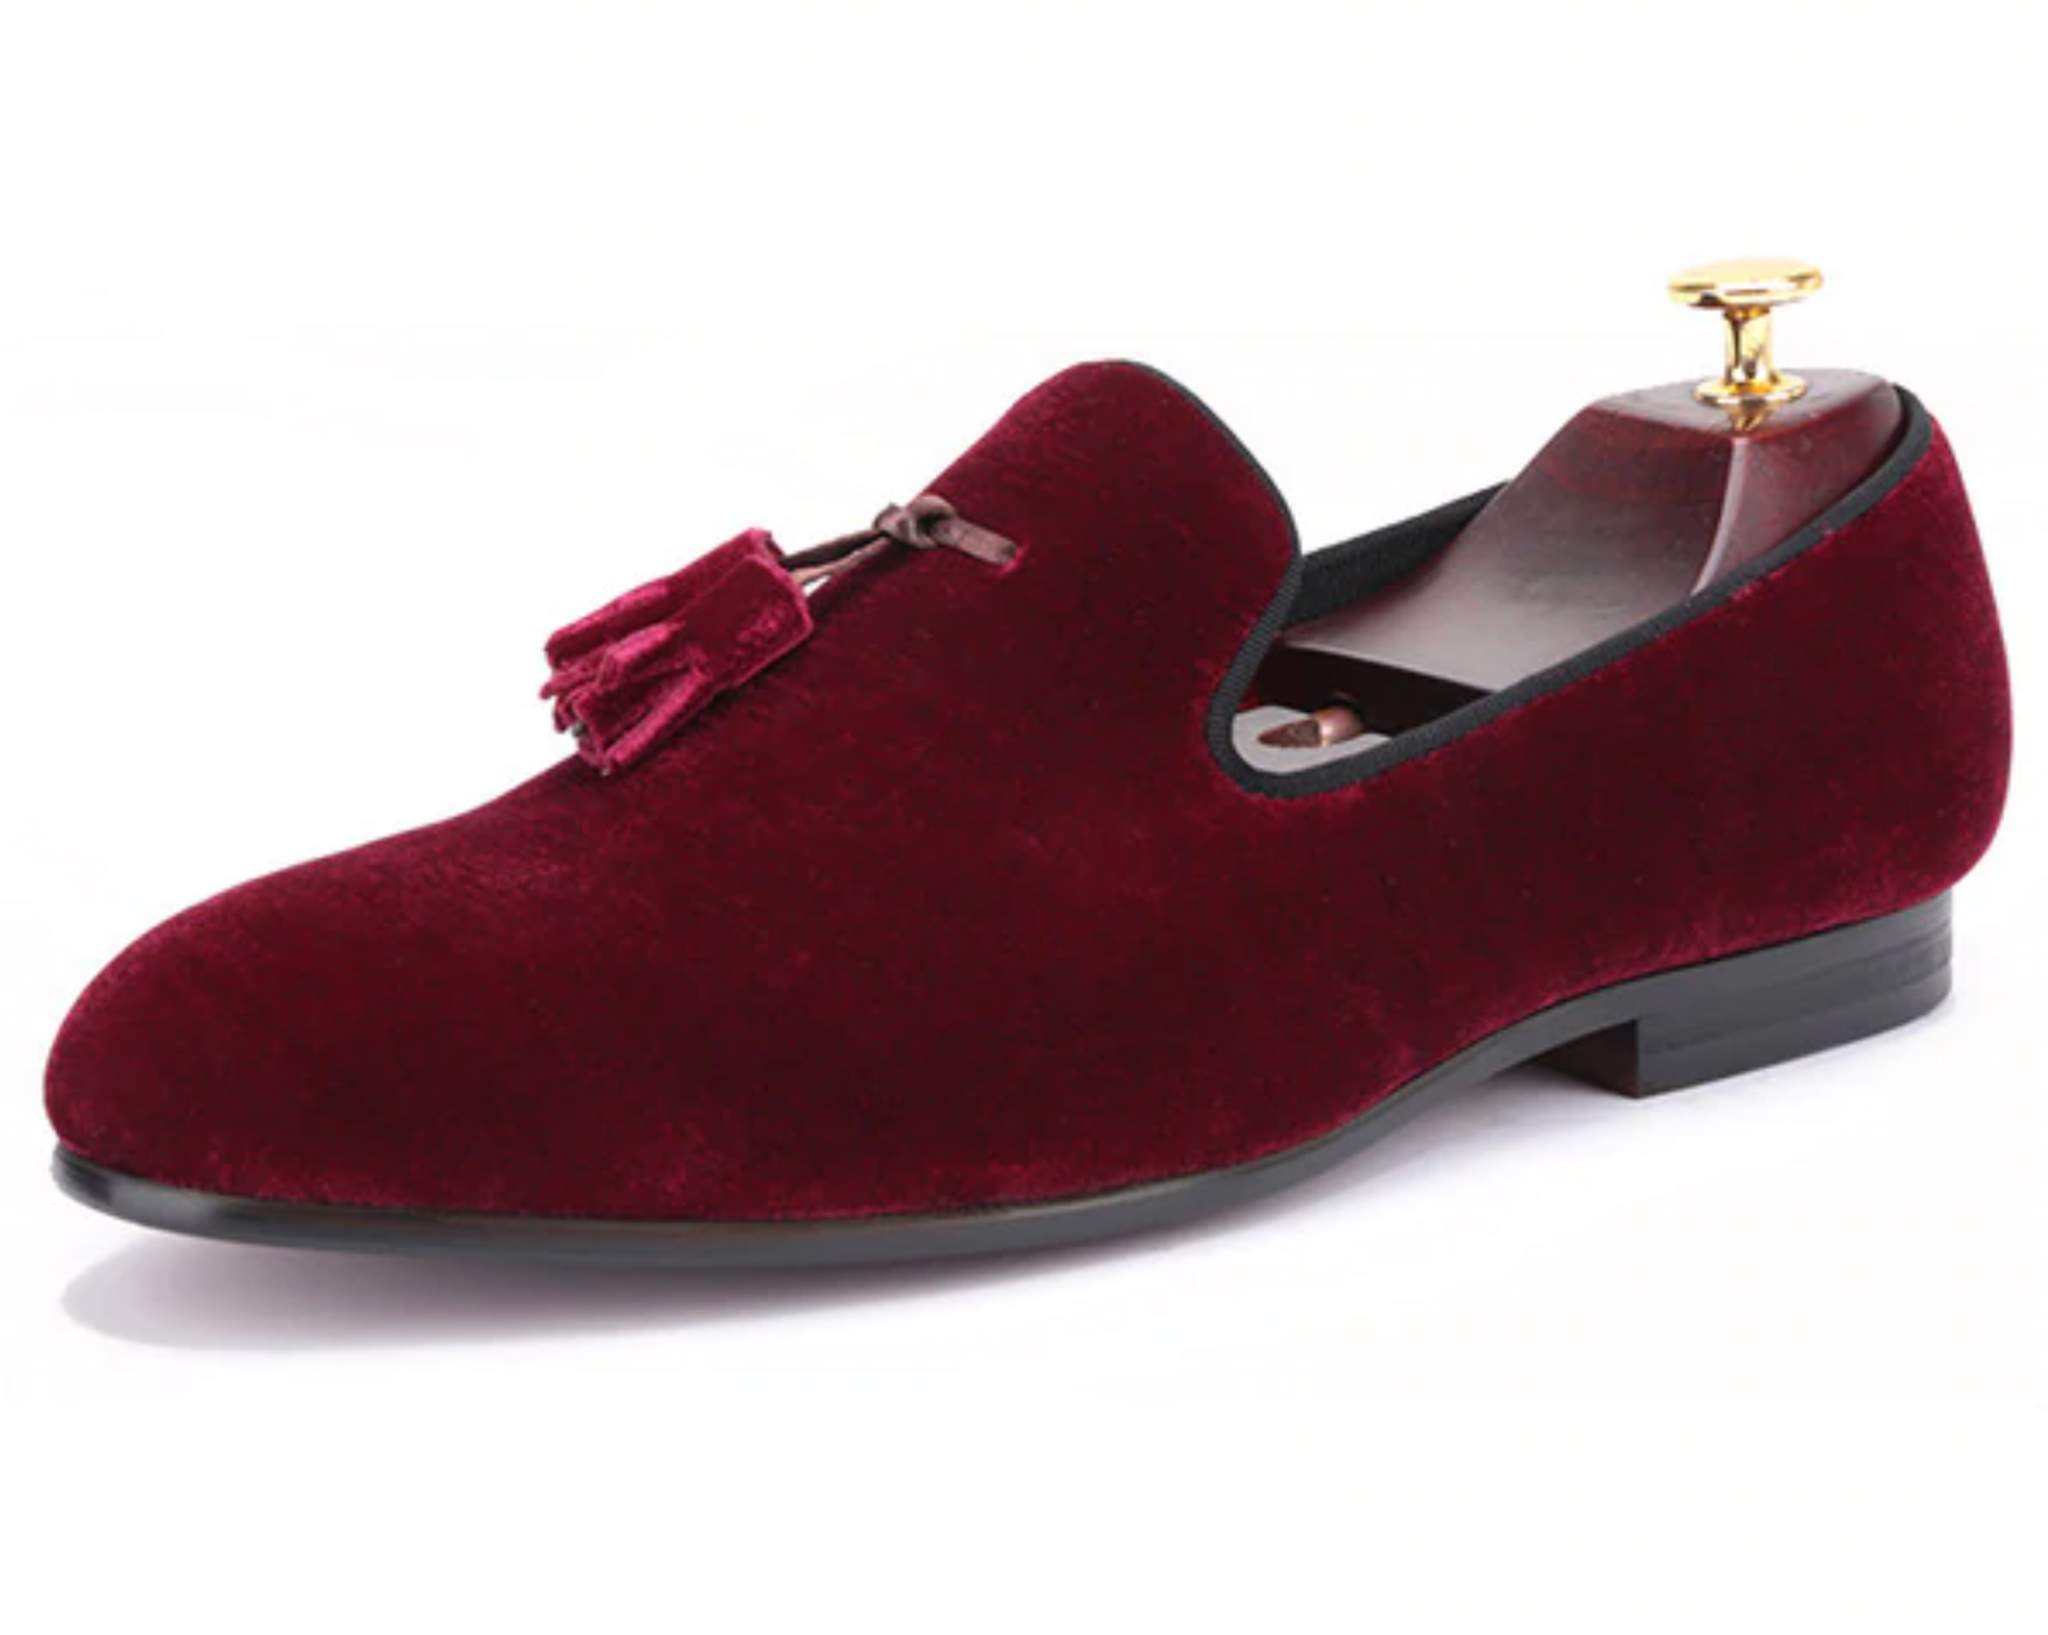 Burgundy velvet-look loafers with a quilted red lining.